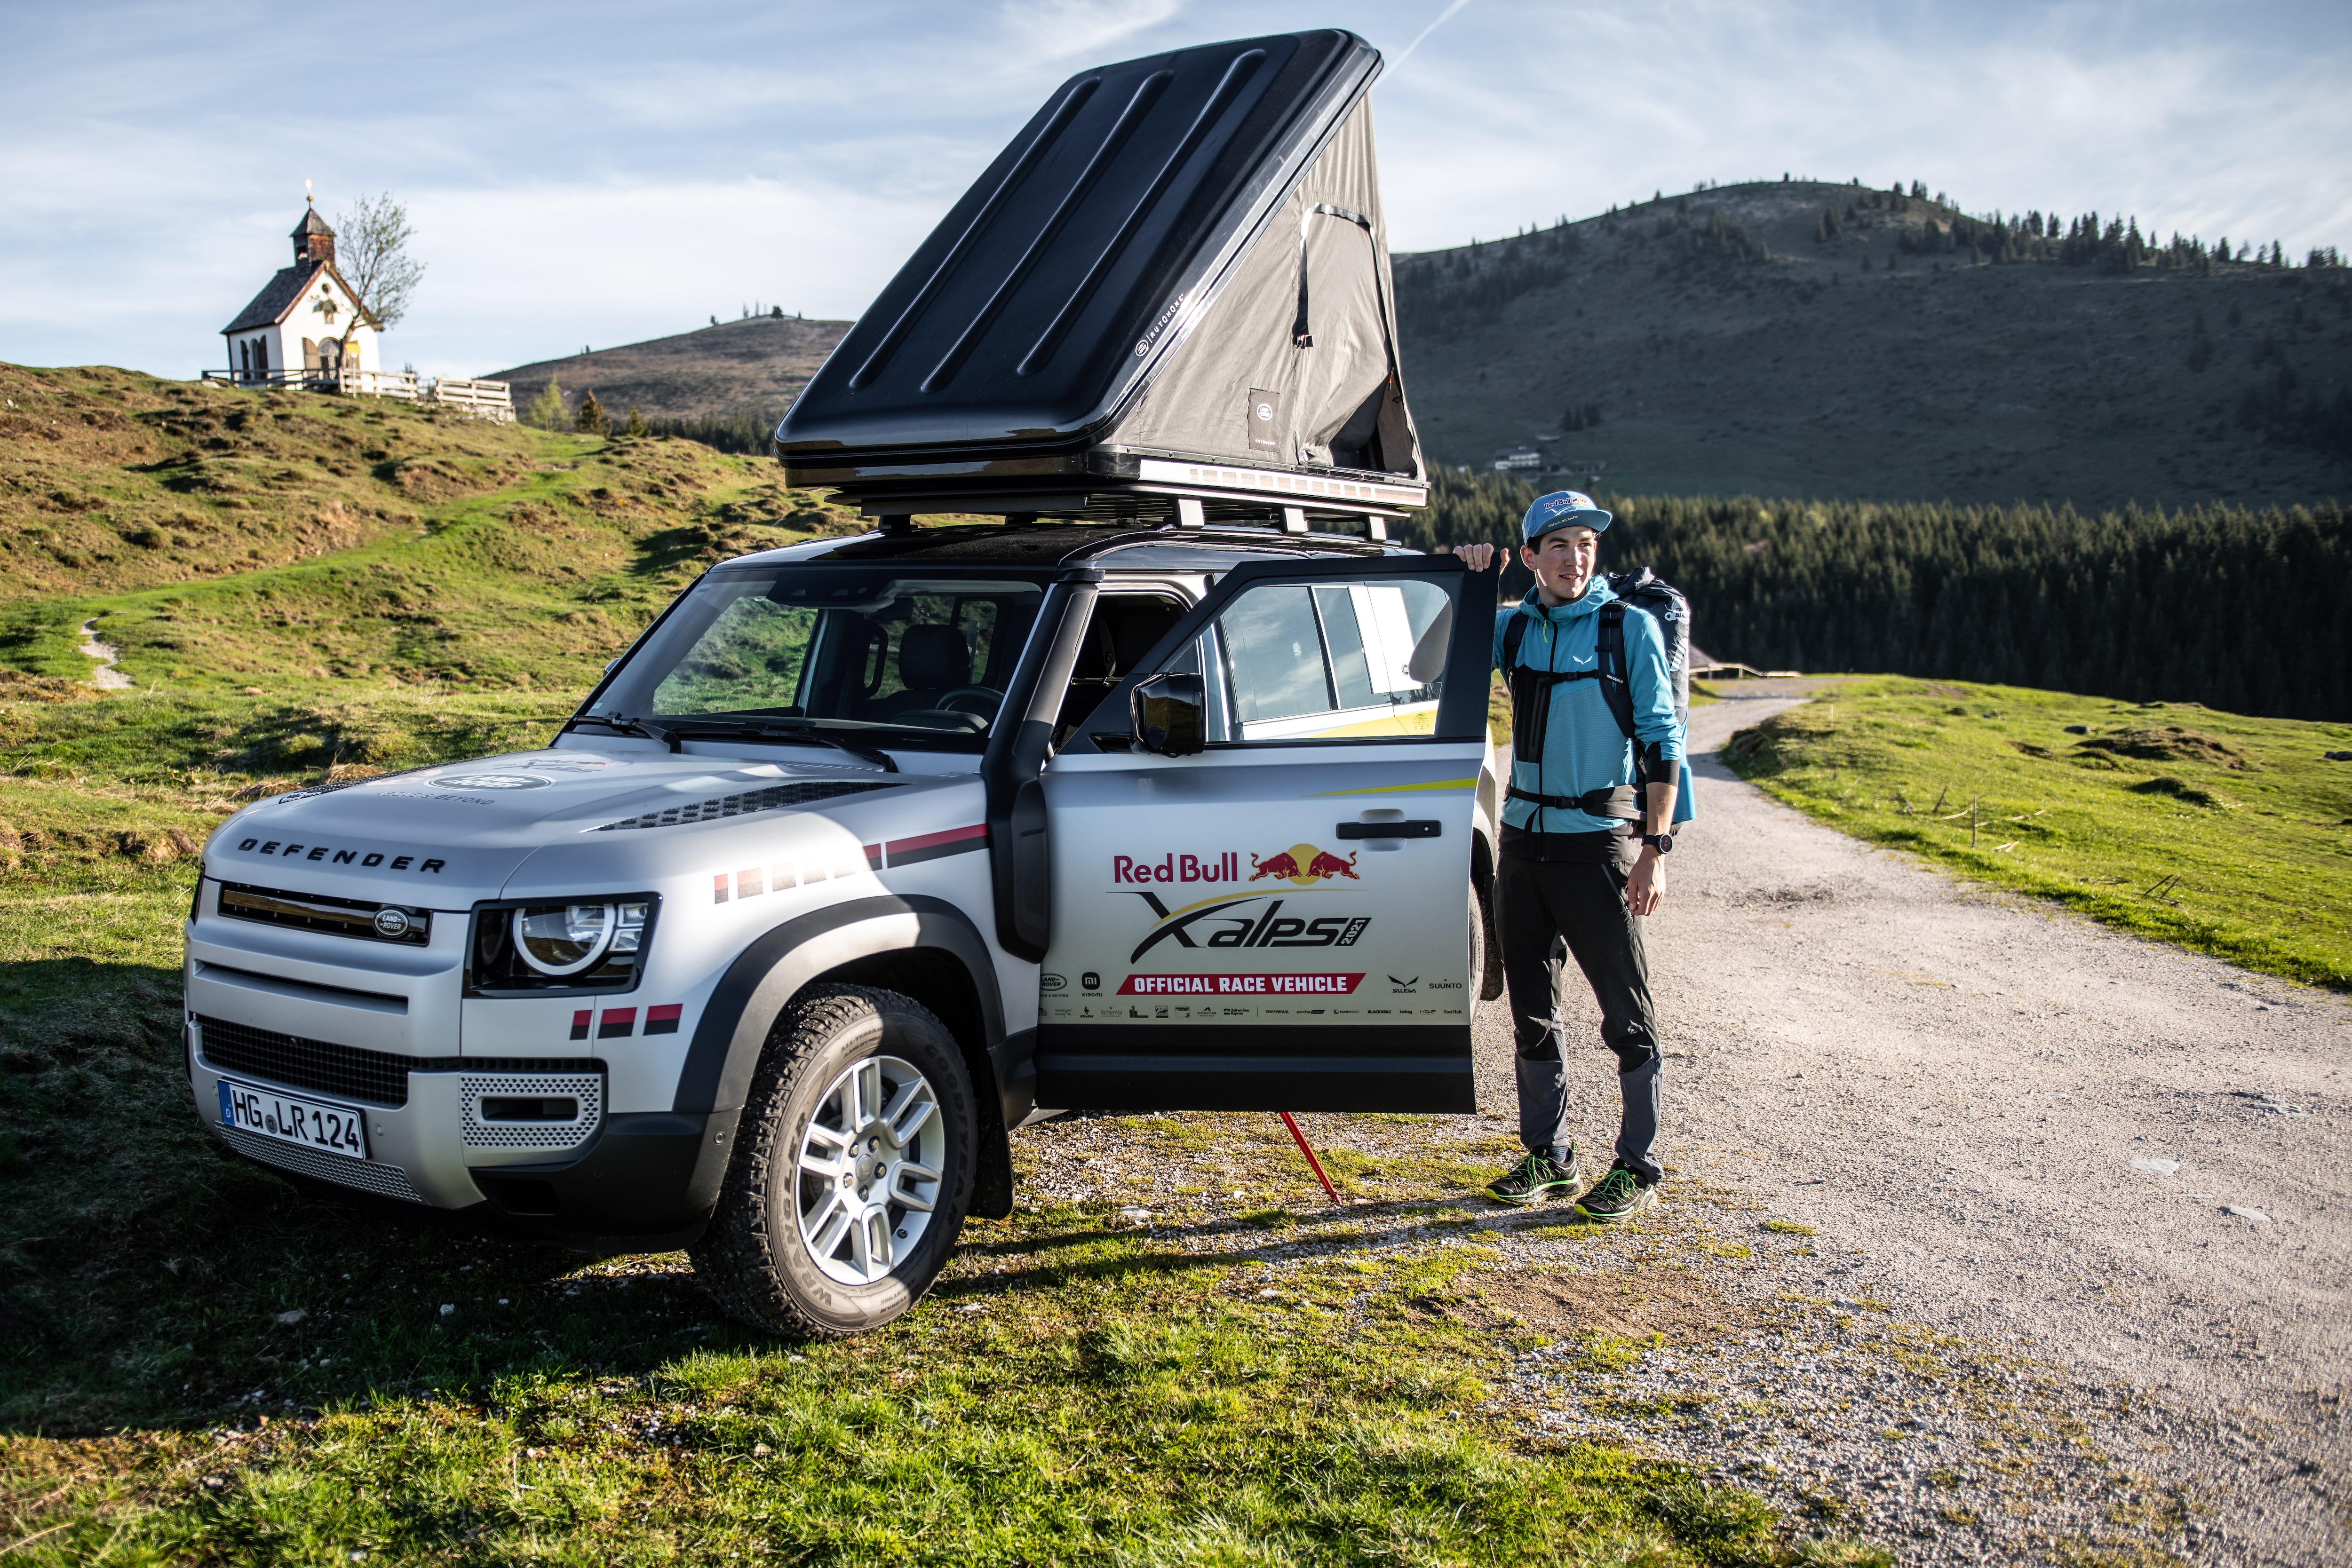 Red Bull X Alps 2021 Land Rover 3